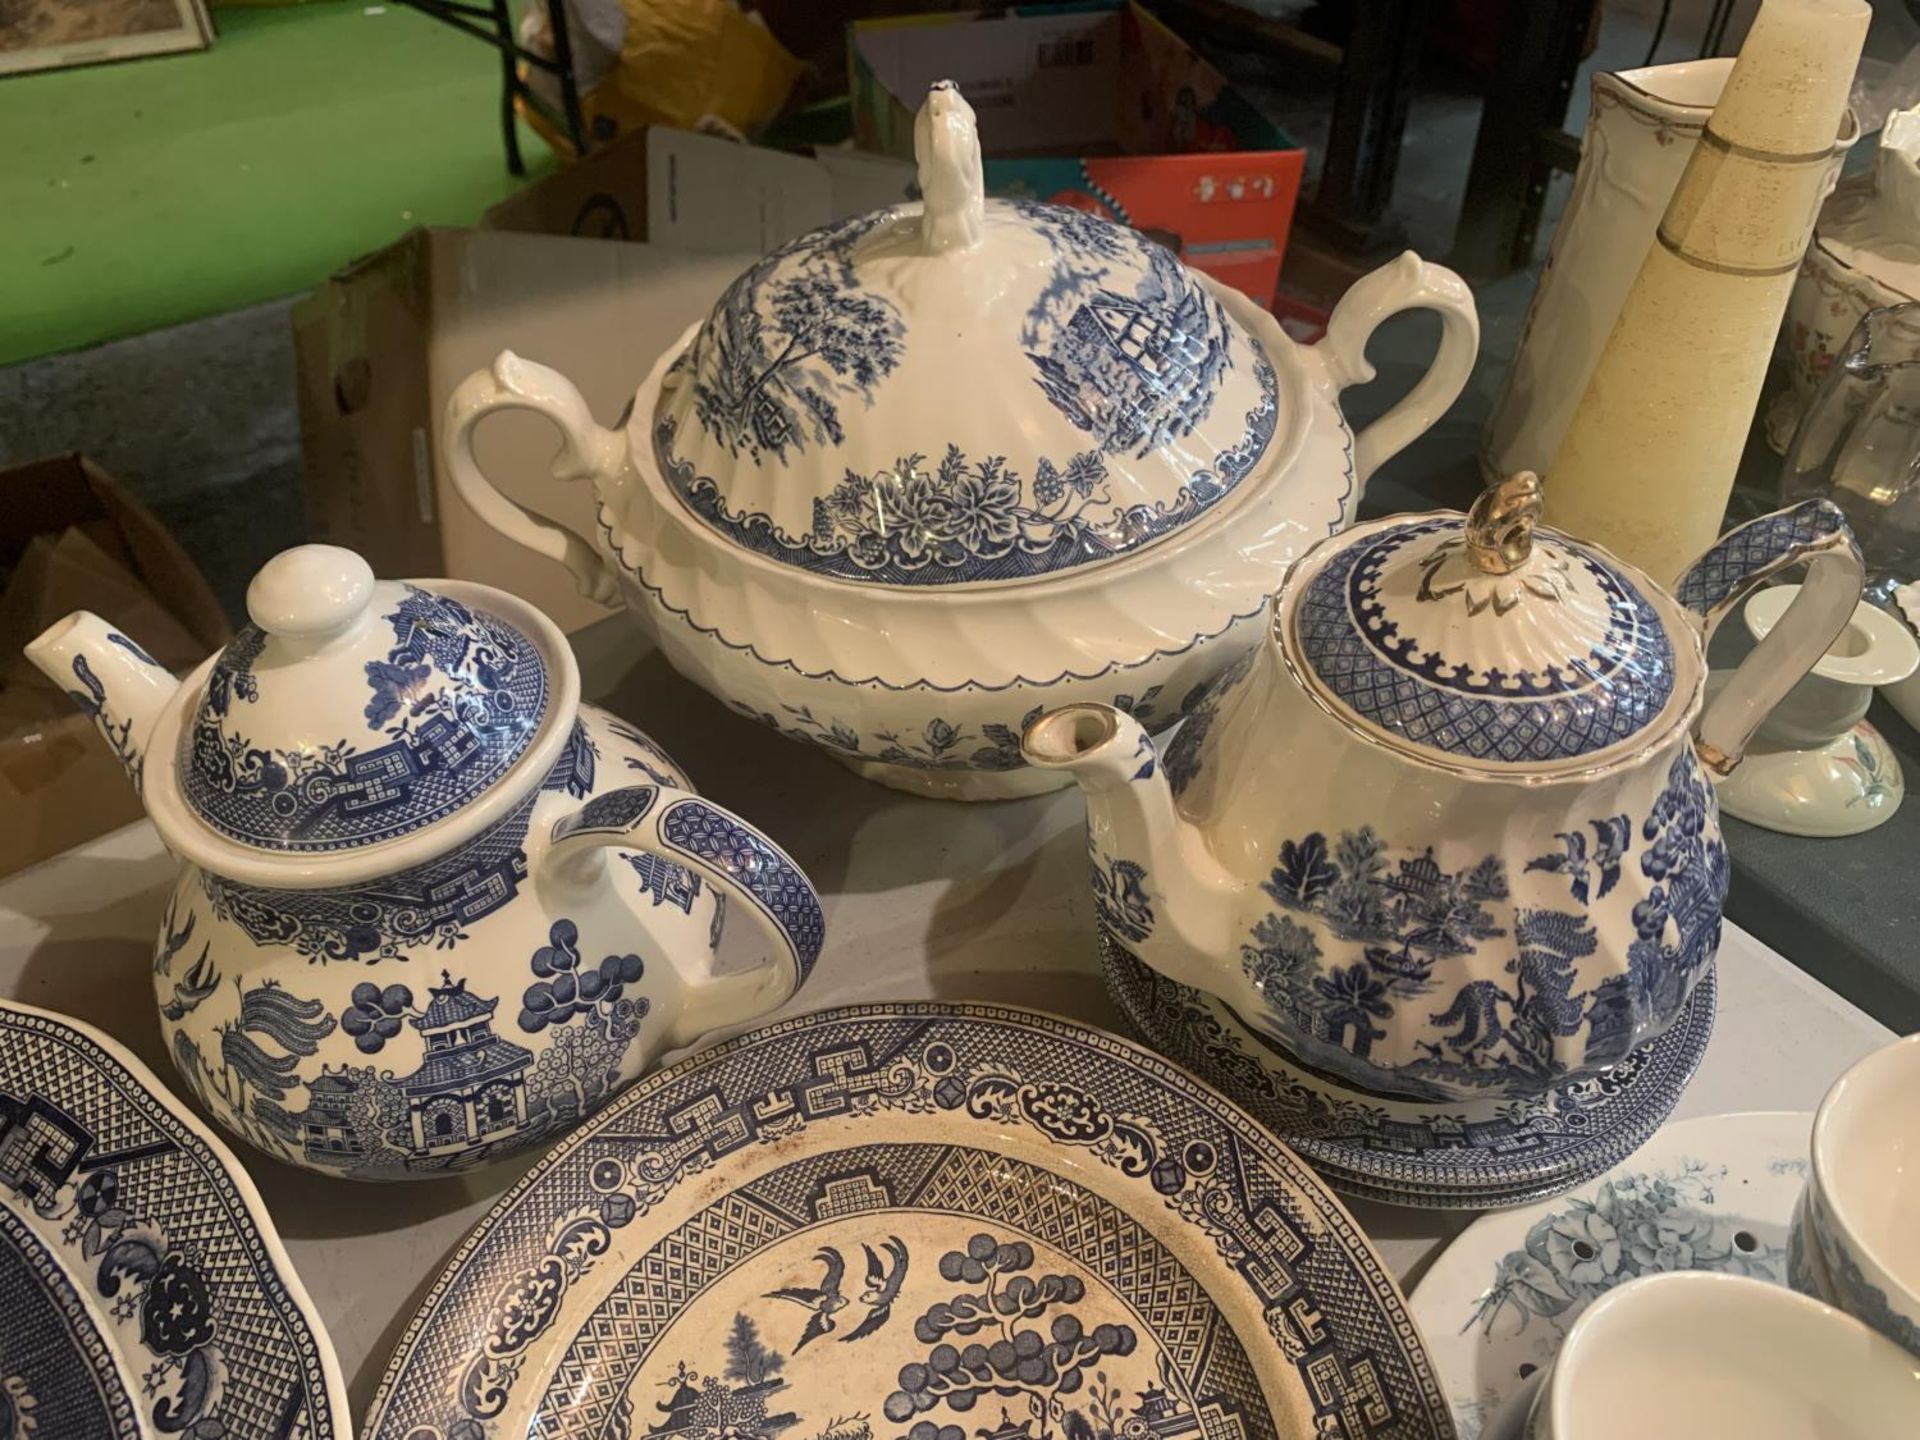 A LARGE ASSORTMENT OF BLUE AND WHITE DECORATIVE CERAMICS TO INCLUDE TEAPOTS, PLATES AND PLACE MATS - Image 4 of 4